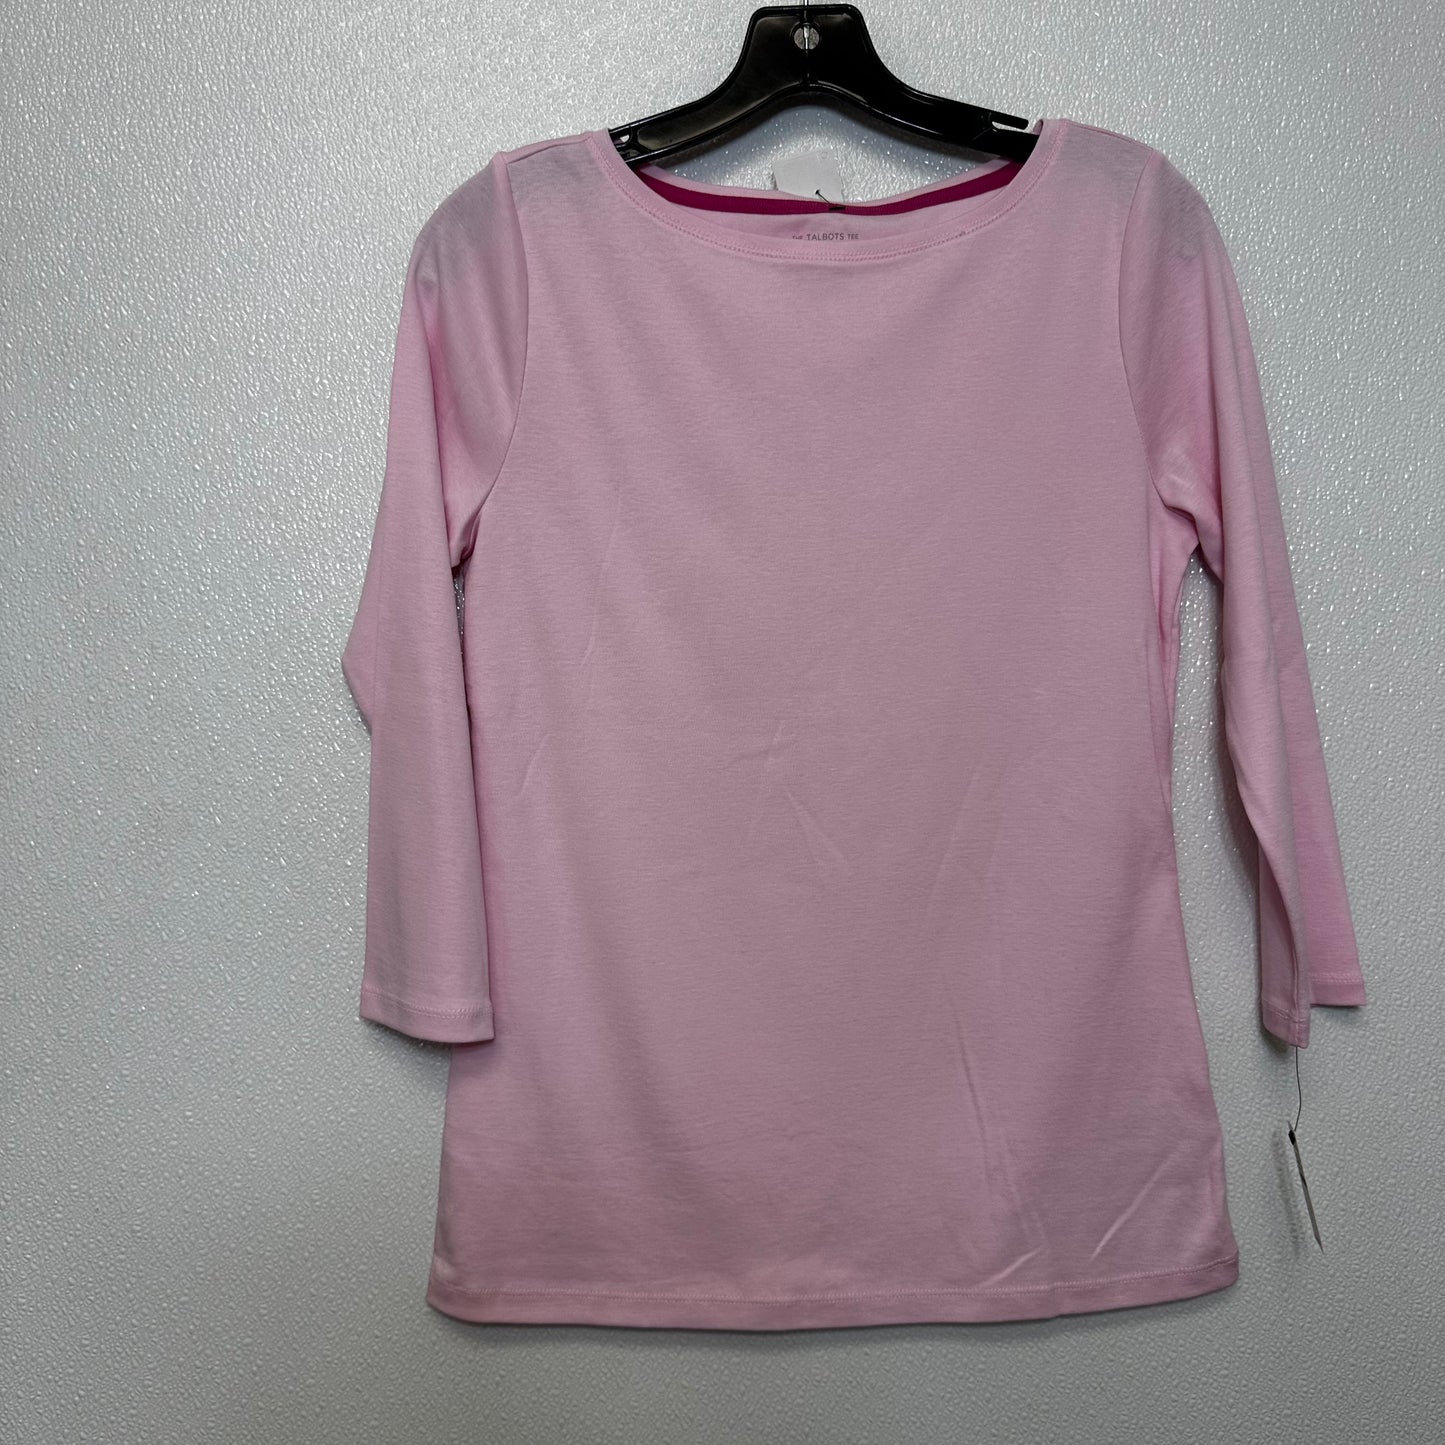 Pink Top Long Sleeve Talbots, Size S